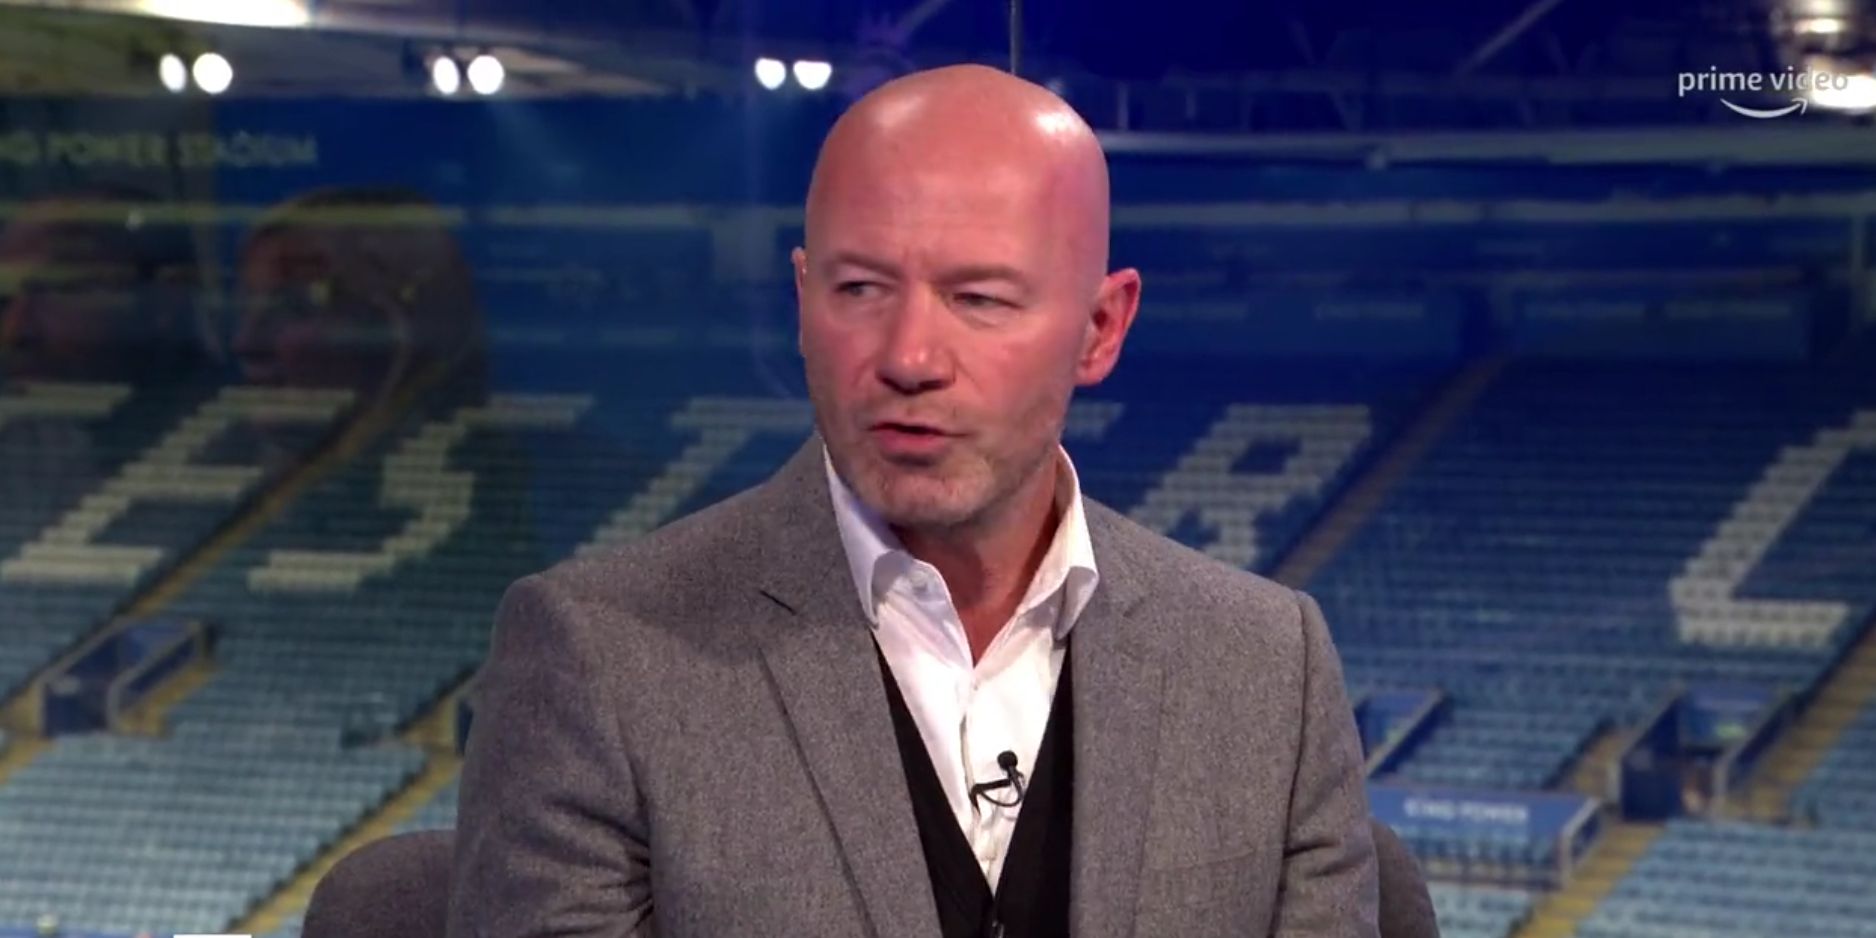 (Video) Alan Shearer says Jurgen Klopp doesn’t have an ‘excuse’ for his side’s performance against Leicester City